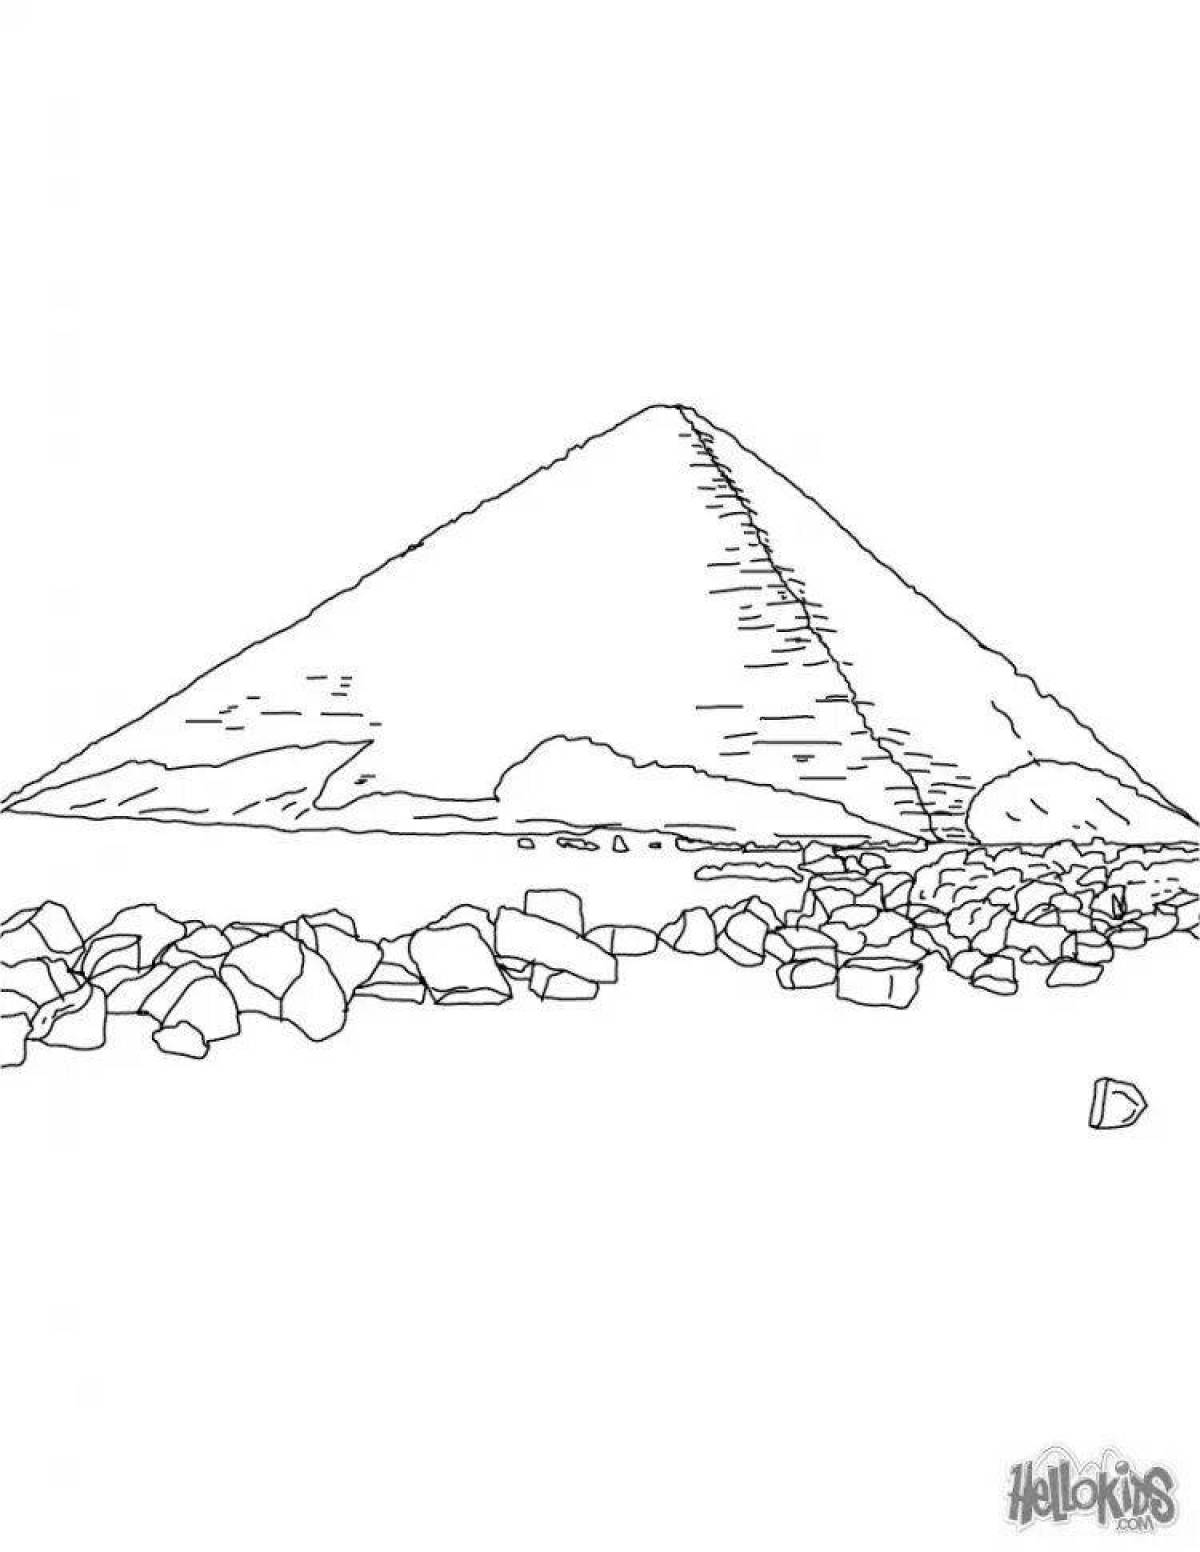 Great pyramid of cheops coloring book